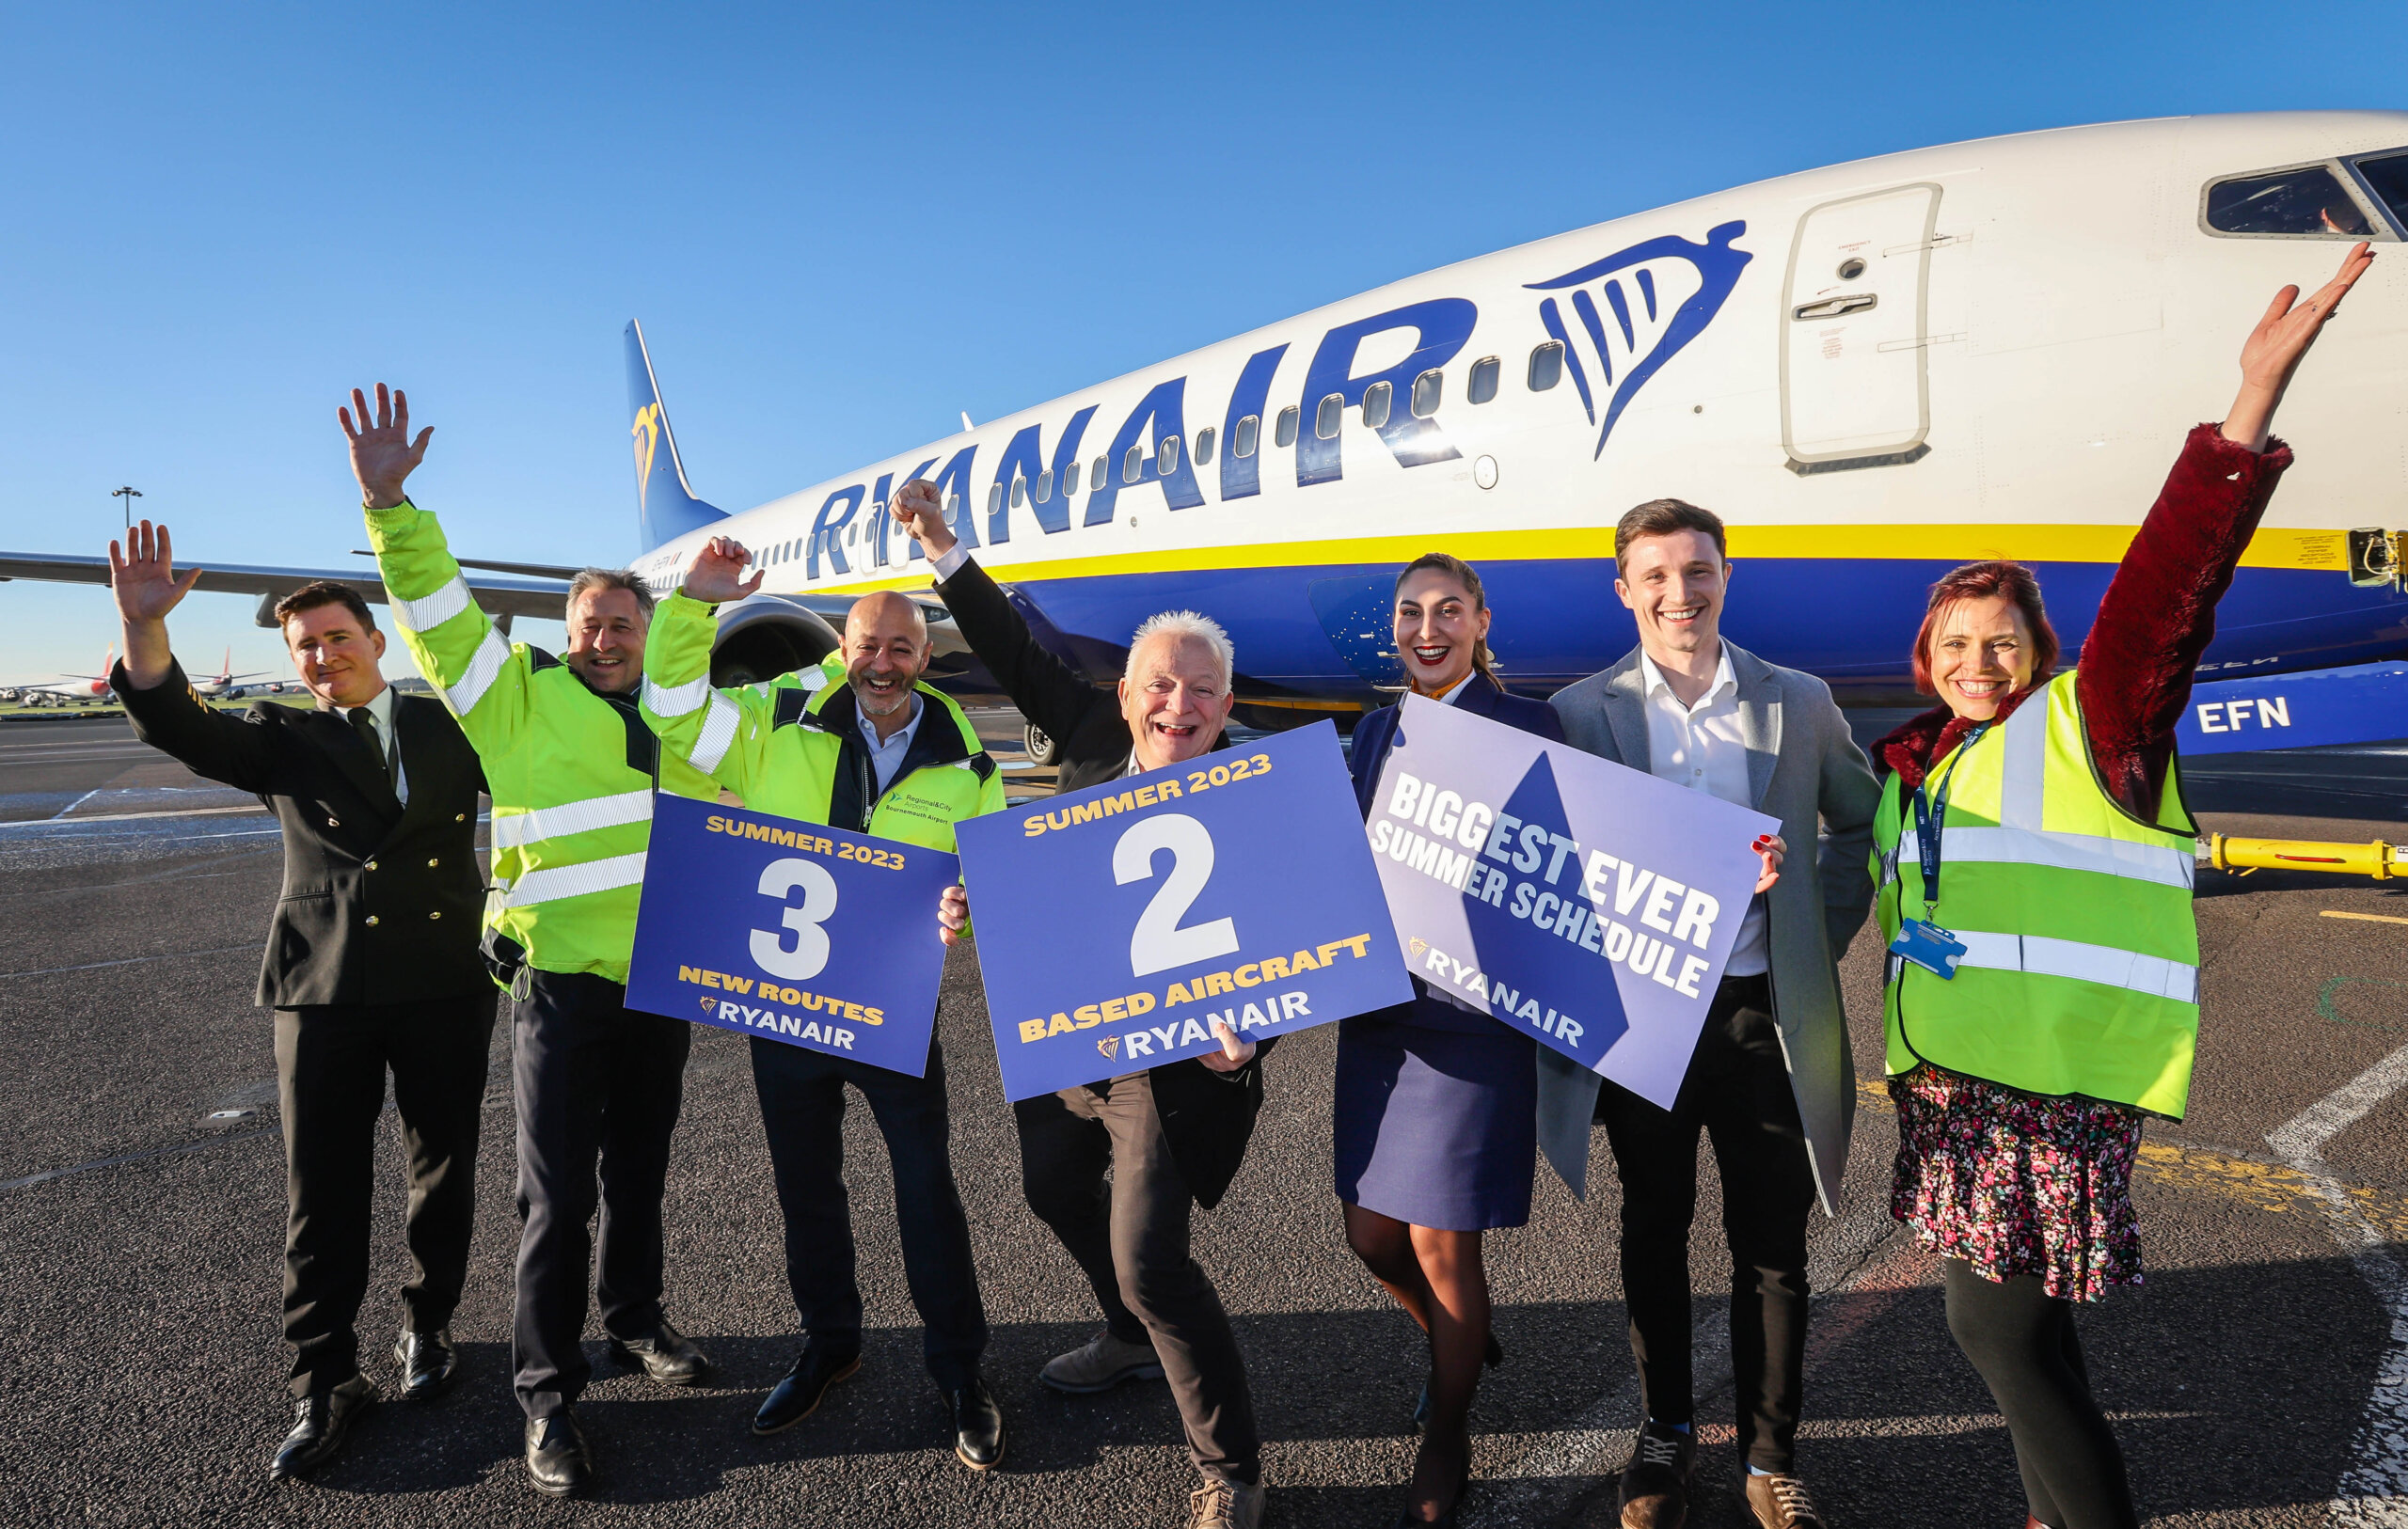 RYANAIR ANNOUNCES BIGGEST EVER BOURNEMOUTH SCHEDULE FOR SUMMER ‘23